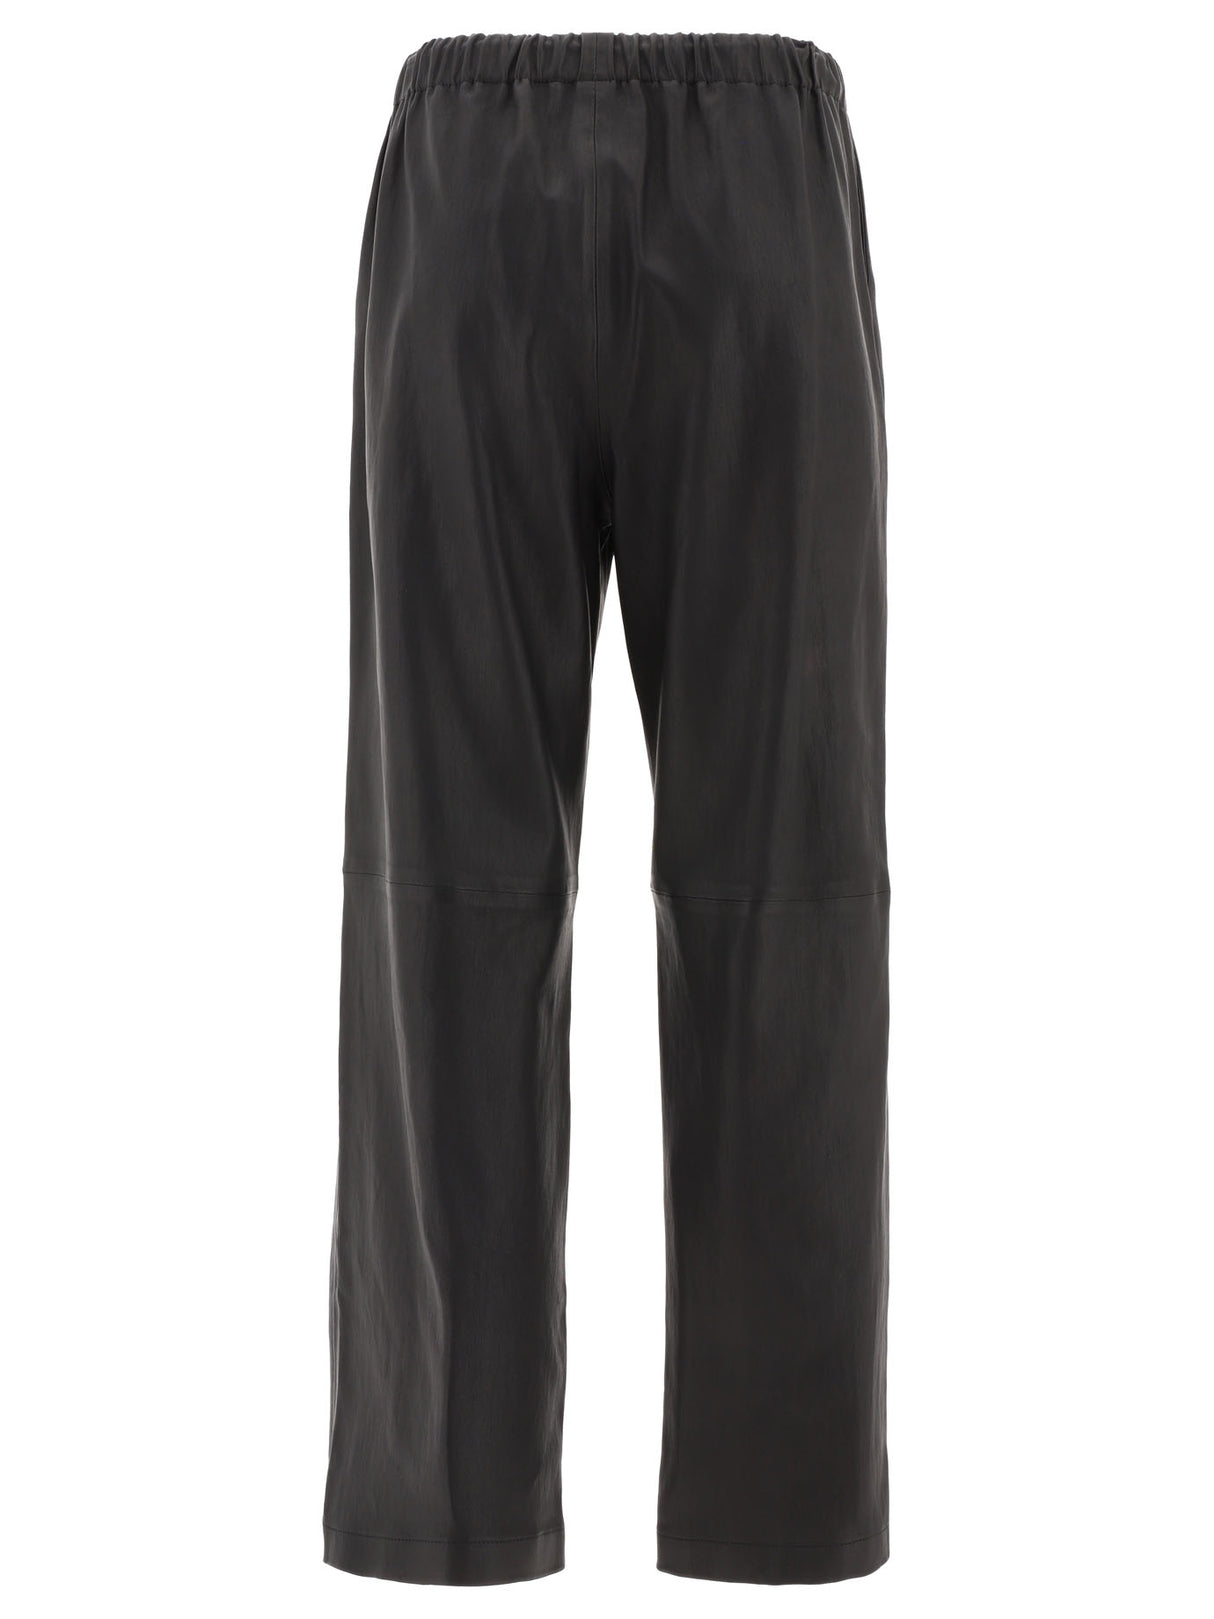 INÈS & MARÉCHAL High-Rise Drawstring Trousers for Women - Black Leather Pants for FW22